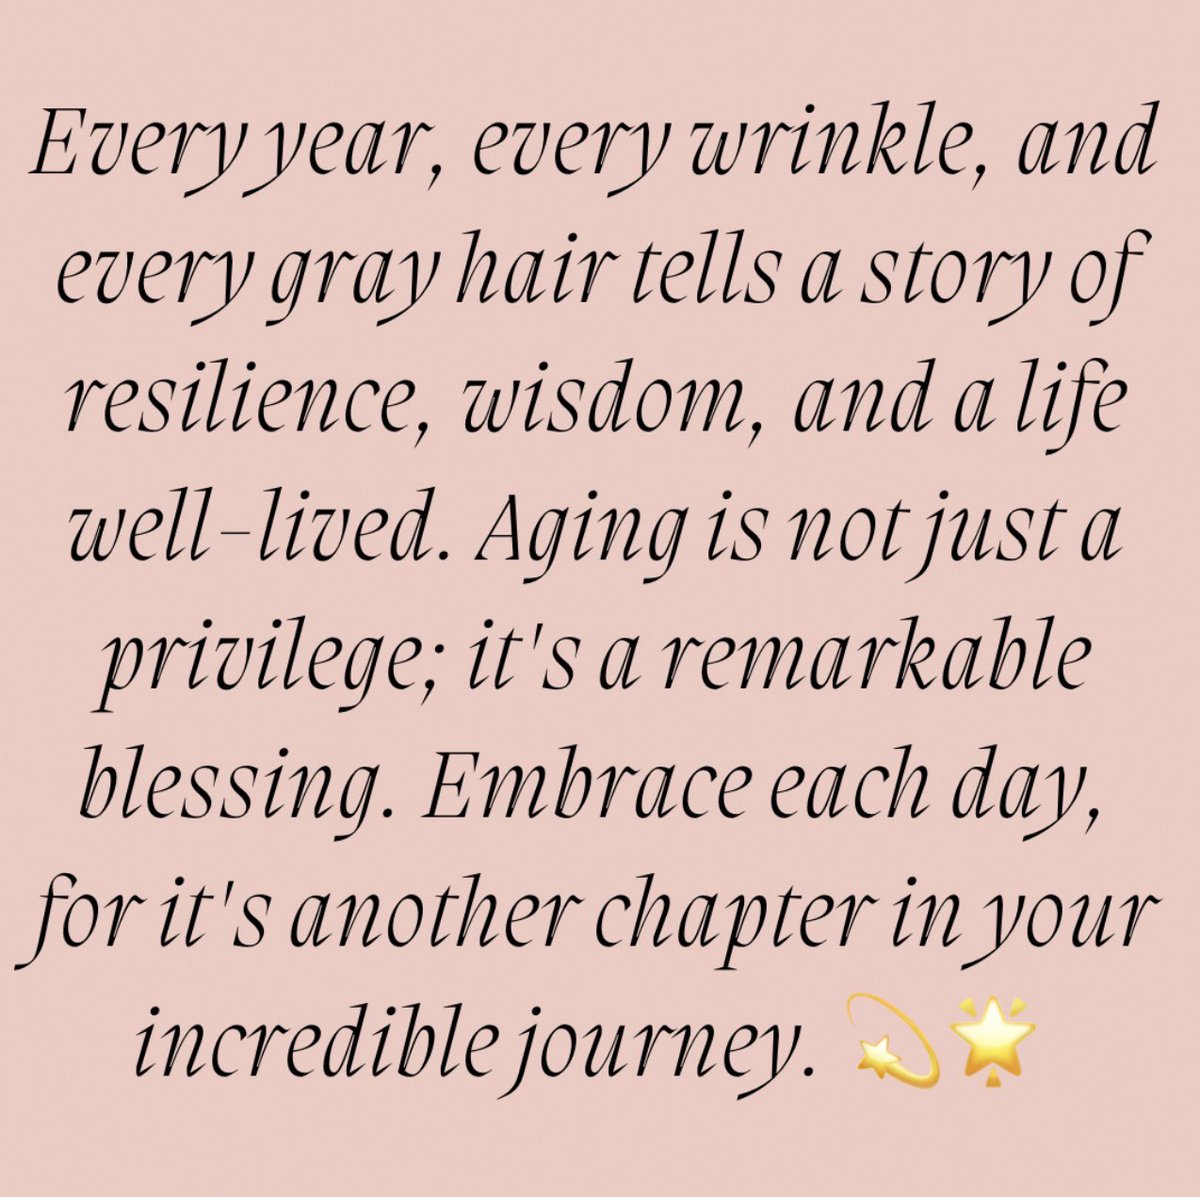 What's one cherished memory or piece of wisdom you've gained as you've grown older that you wouldn't trade for anything? Here is one of mine!💬 

#AgingIsABlessing #AgingGracefully #WisdomOfAging #EmbraceAging #LifeWellLived #AgeWithGrace
#GrowingOlder #CherishedMemories